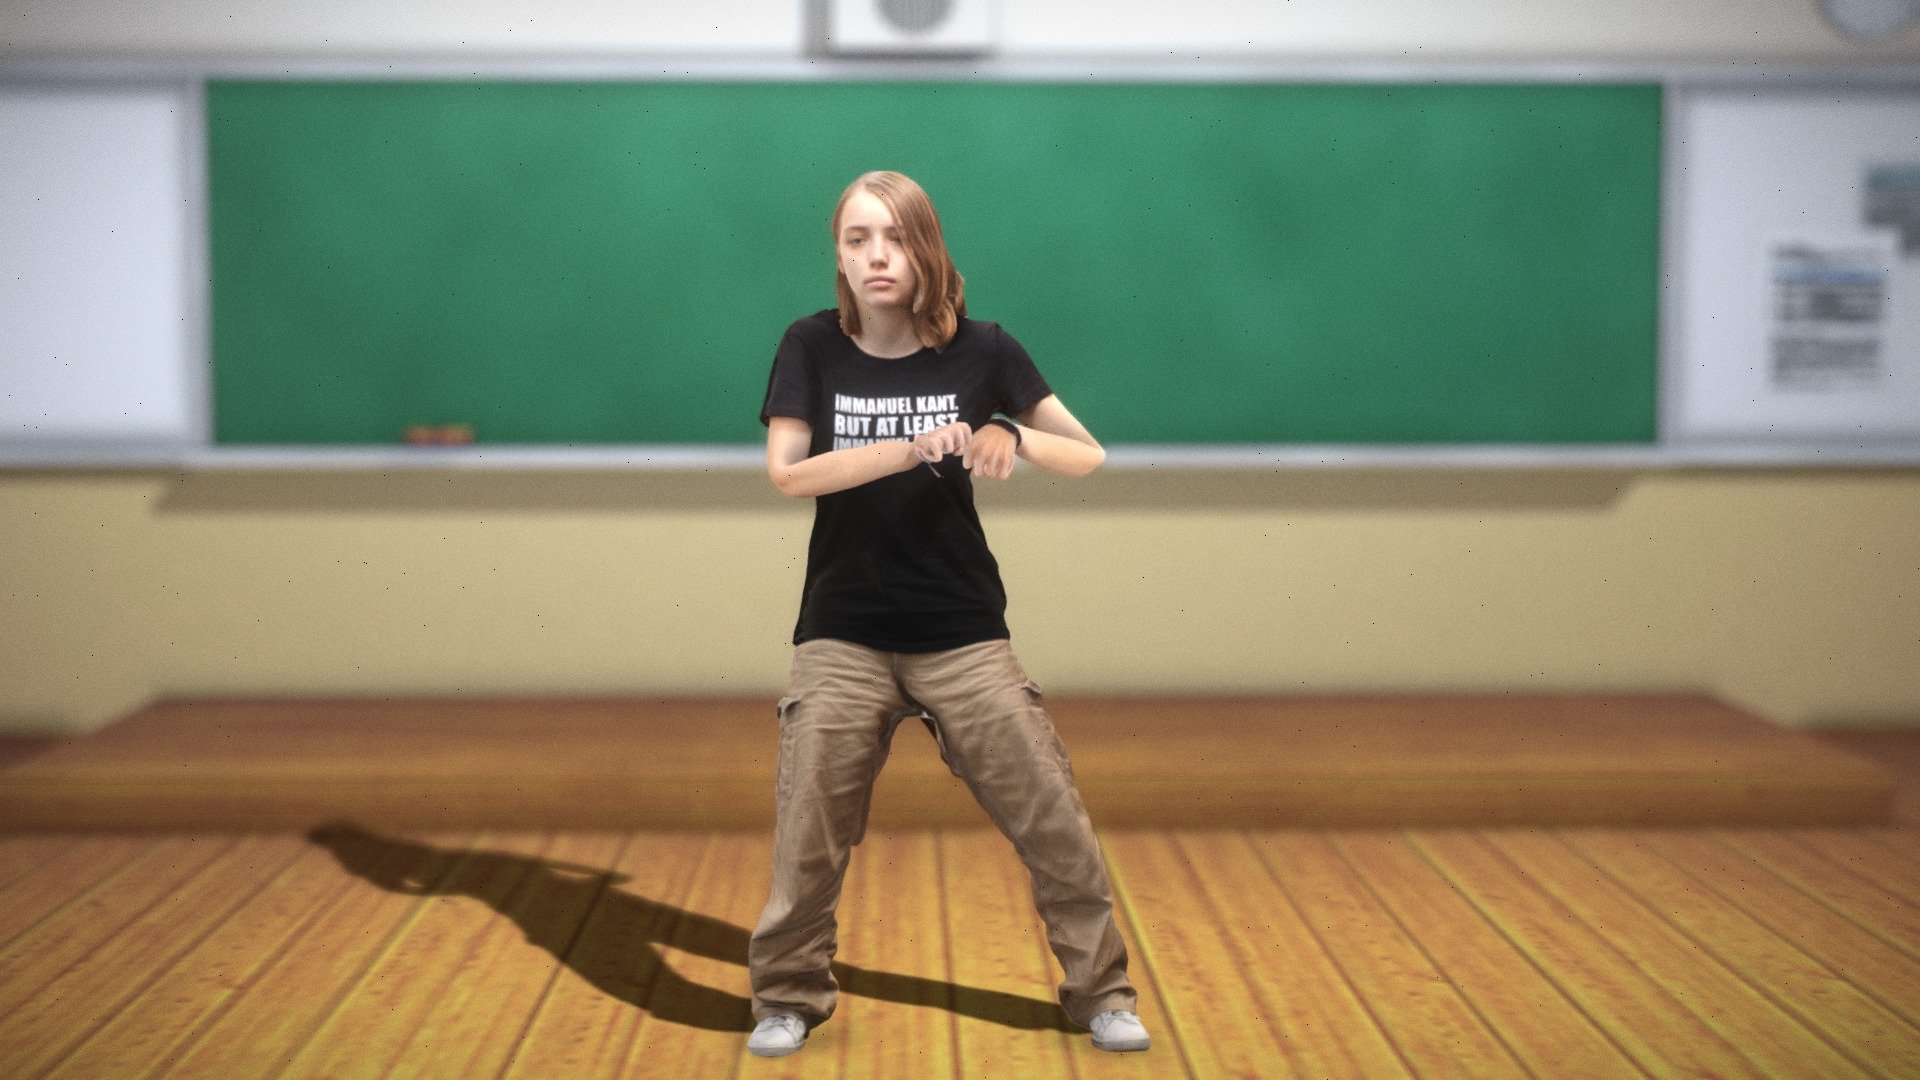 Scene of a blonde girl dancing in a Room. Mesh created and captured in our Studio in Vienna, Kaisermühlen.

Background Scene by NewDOF:
https://sketchfab.com/3d-models/imitation-classroom-stage-b2a393020cee4f54b61cca70ea95ac35 - Scene - Blonde Girl Dancing - 3D model by ViARsys 3d model